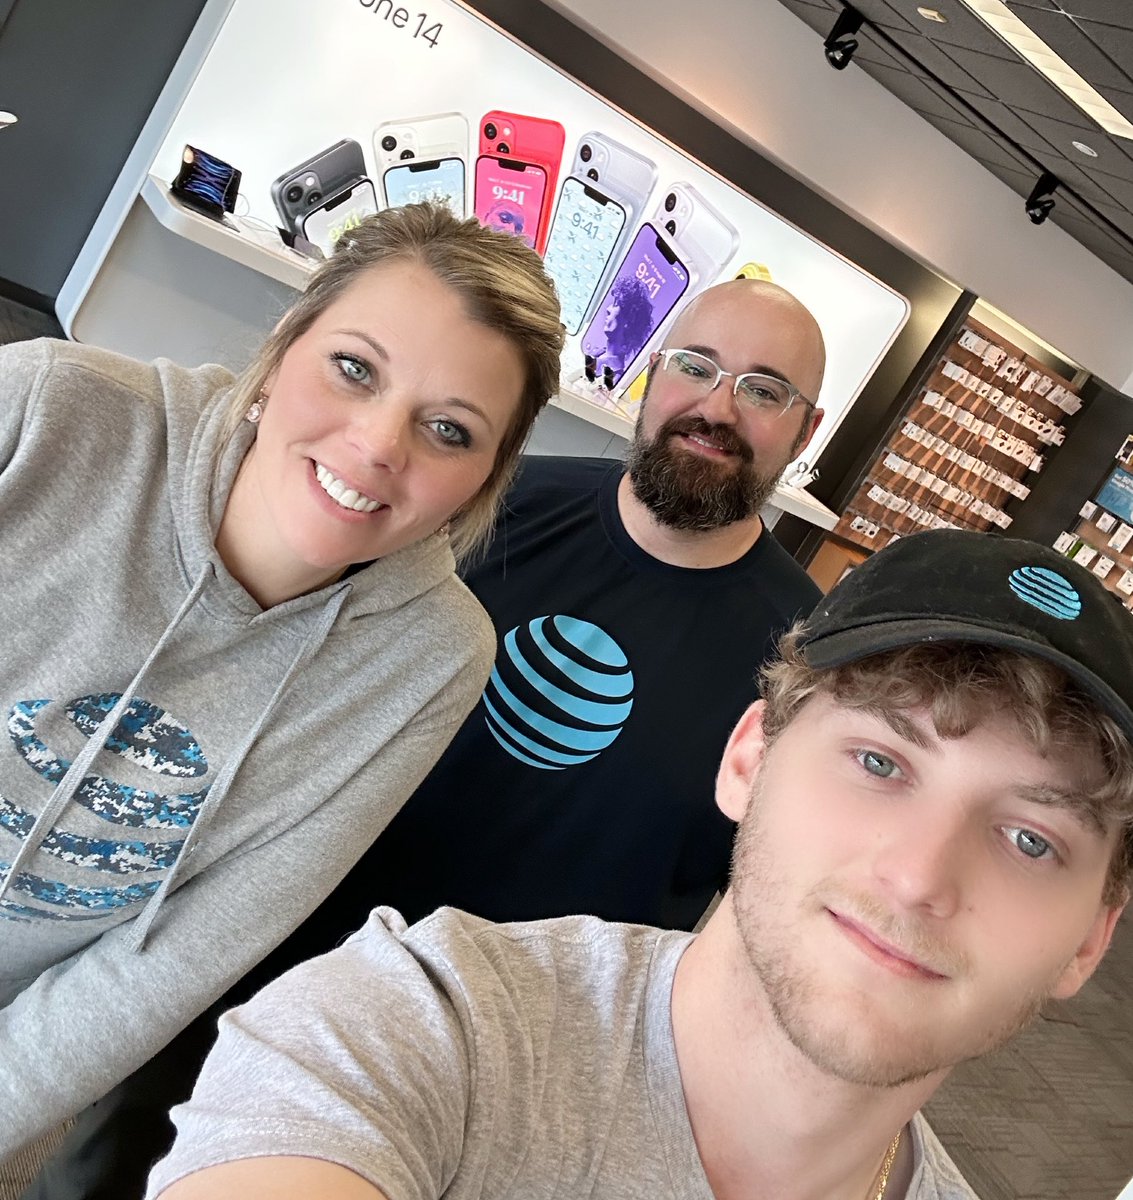 A little cross collab today with @DonnieRandazzo8 and @BretMcdavid  strategizing and sharing best practices! #WeAreBetterTogether #WinMOORE 

@KAMO_ImMOrtals  @KAMOkonnects  @KattiaS_Ramirez